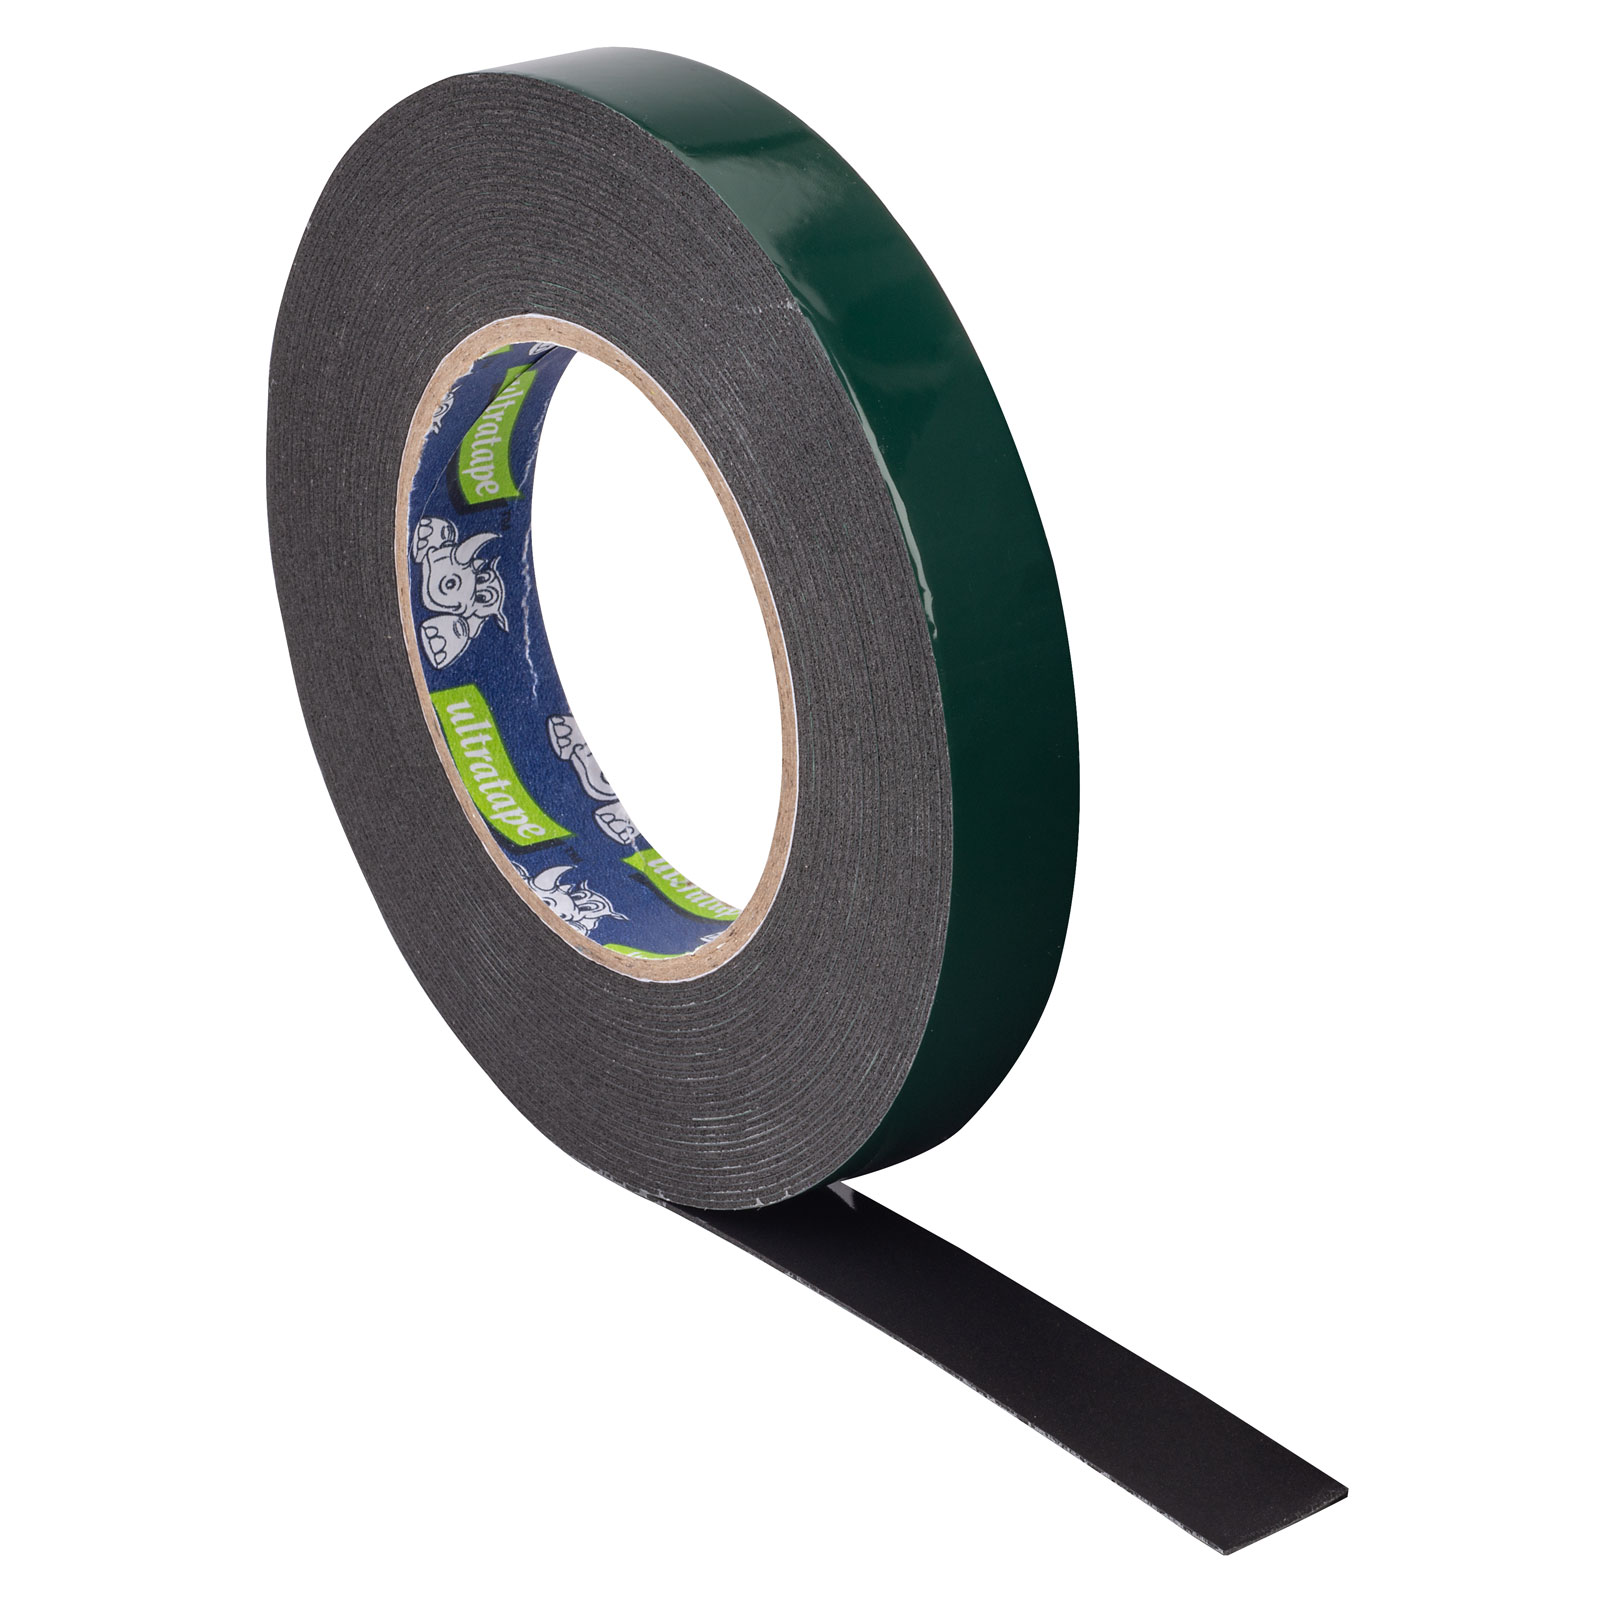 STRONG DOUBLE SIDED TAPE FOR FABRIC 15MMX4M – HANAMARU JAPANESE